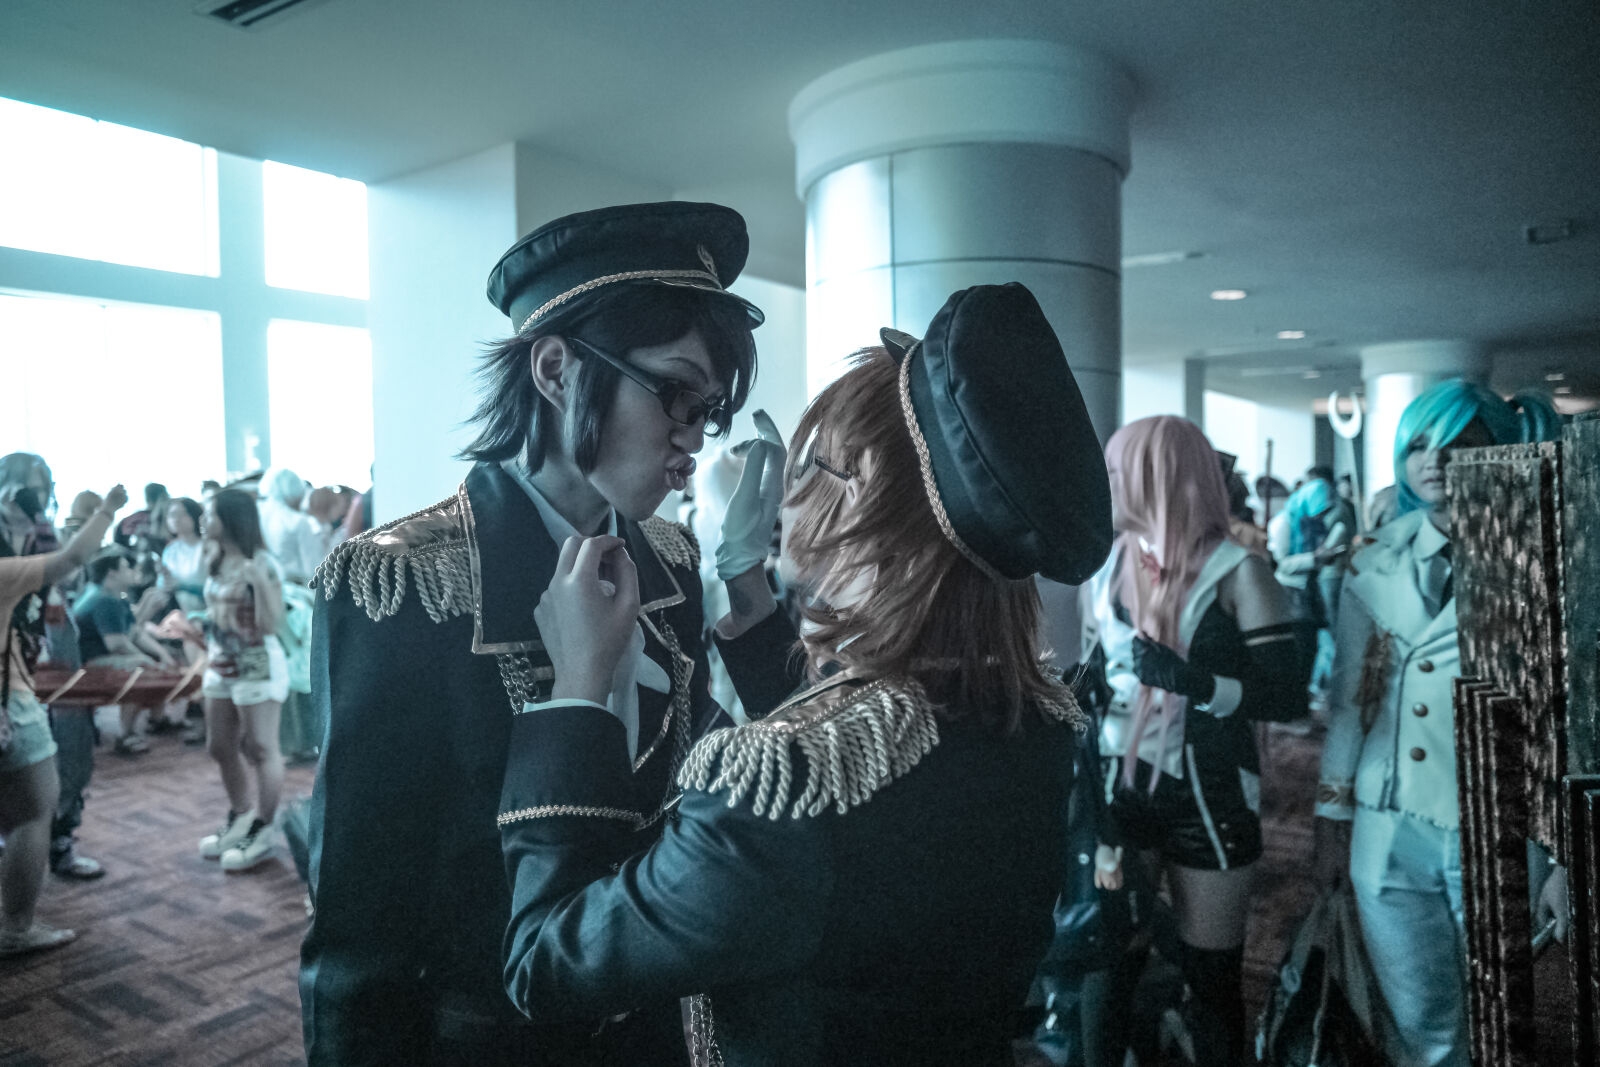 Samsung NX1 sample photo. Cosplay, costumes, couple, crowd photography